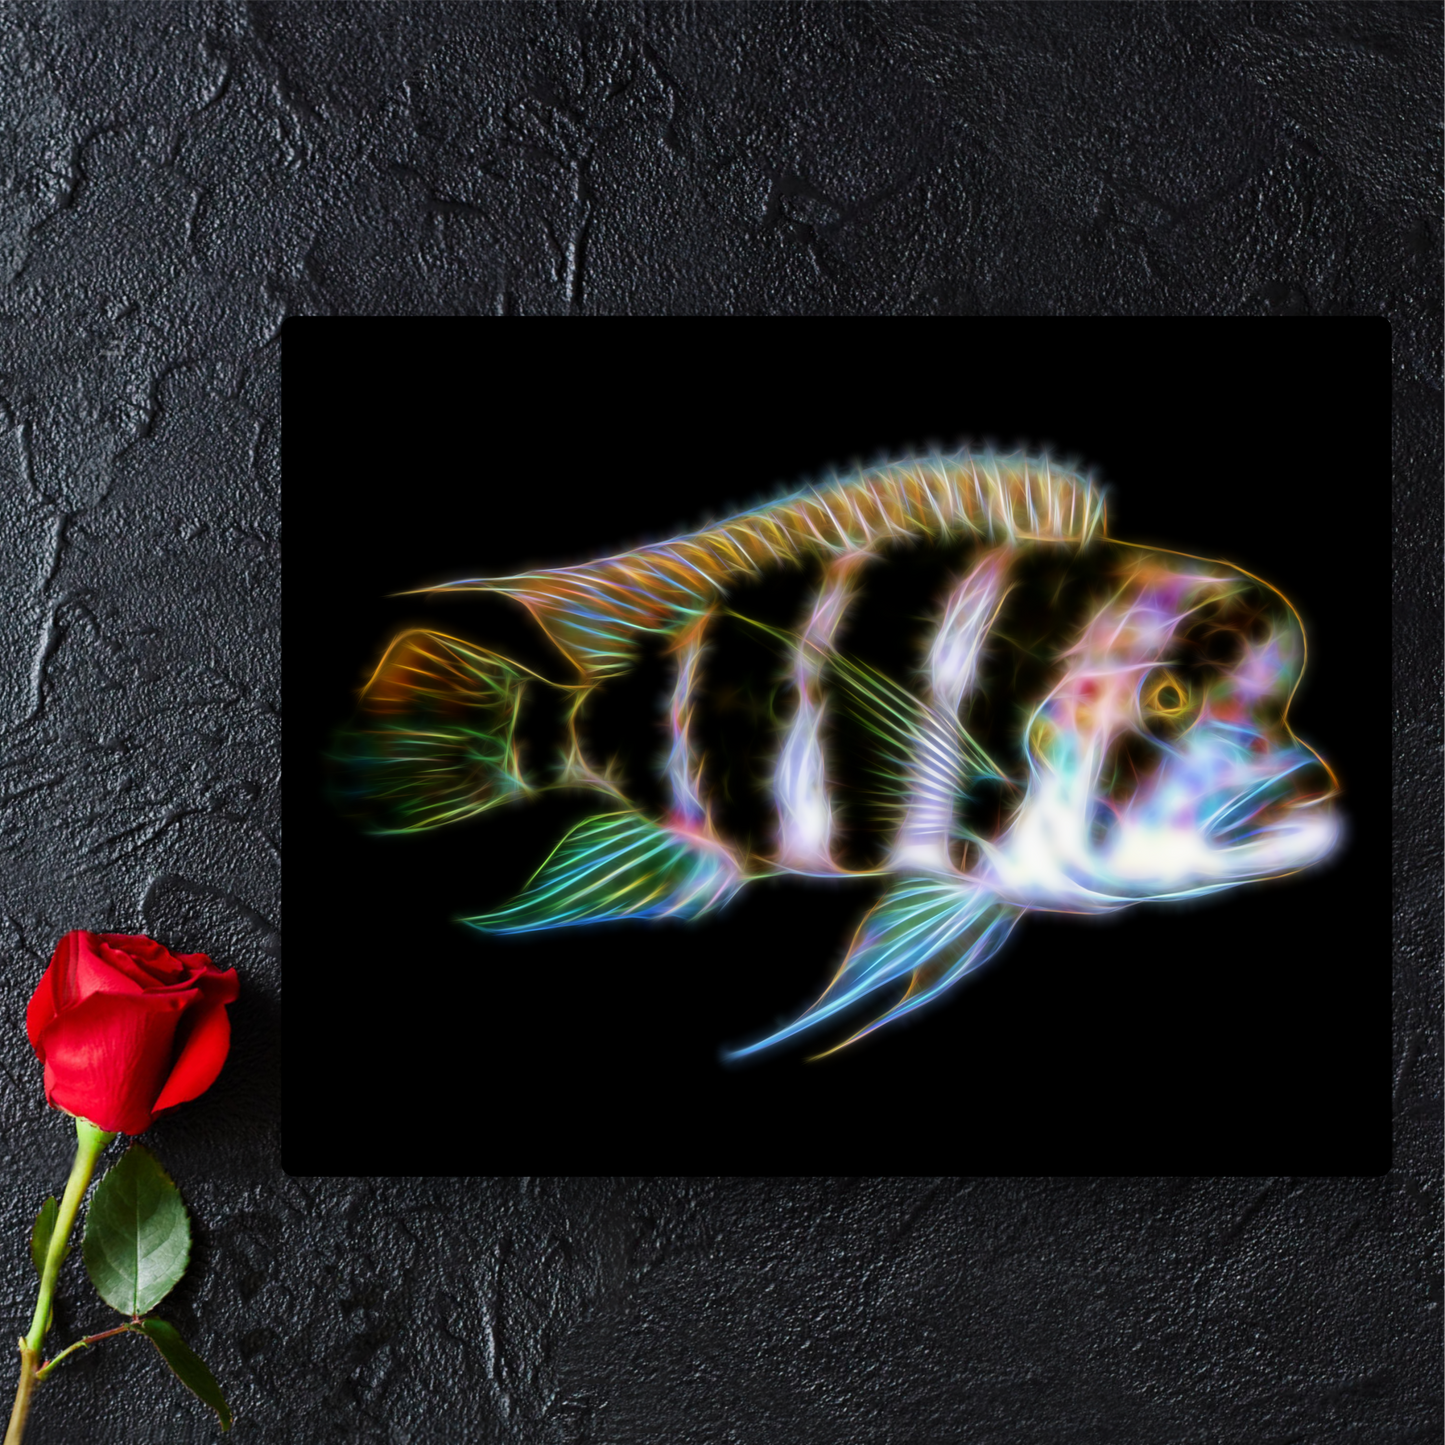 Frontosa Cichlid Metal Wall Plaque Cyphotilapia frontosa